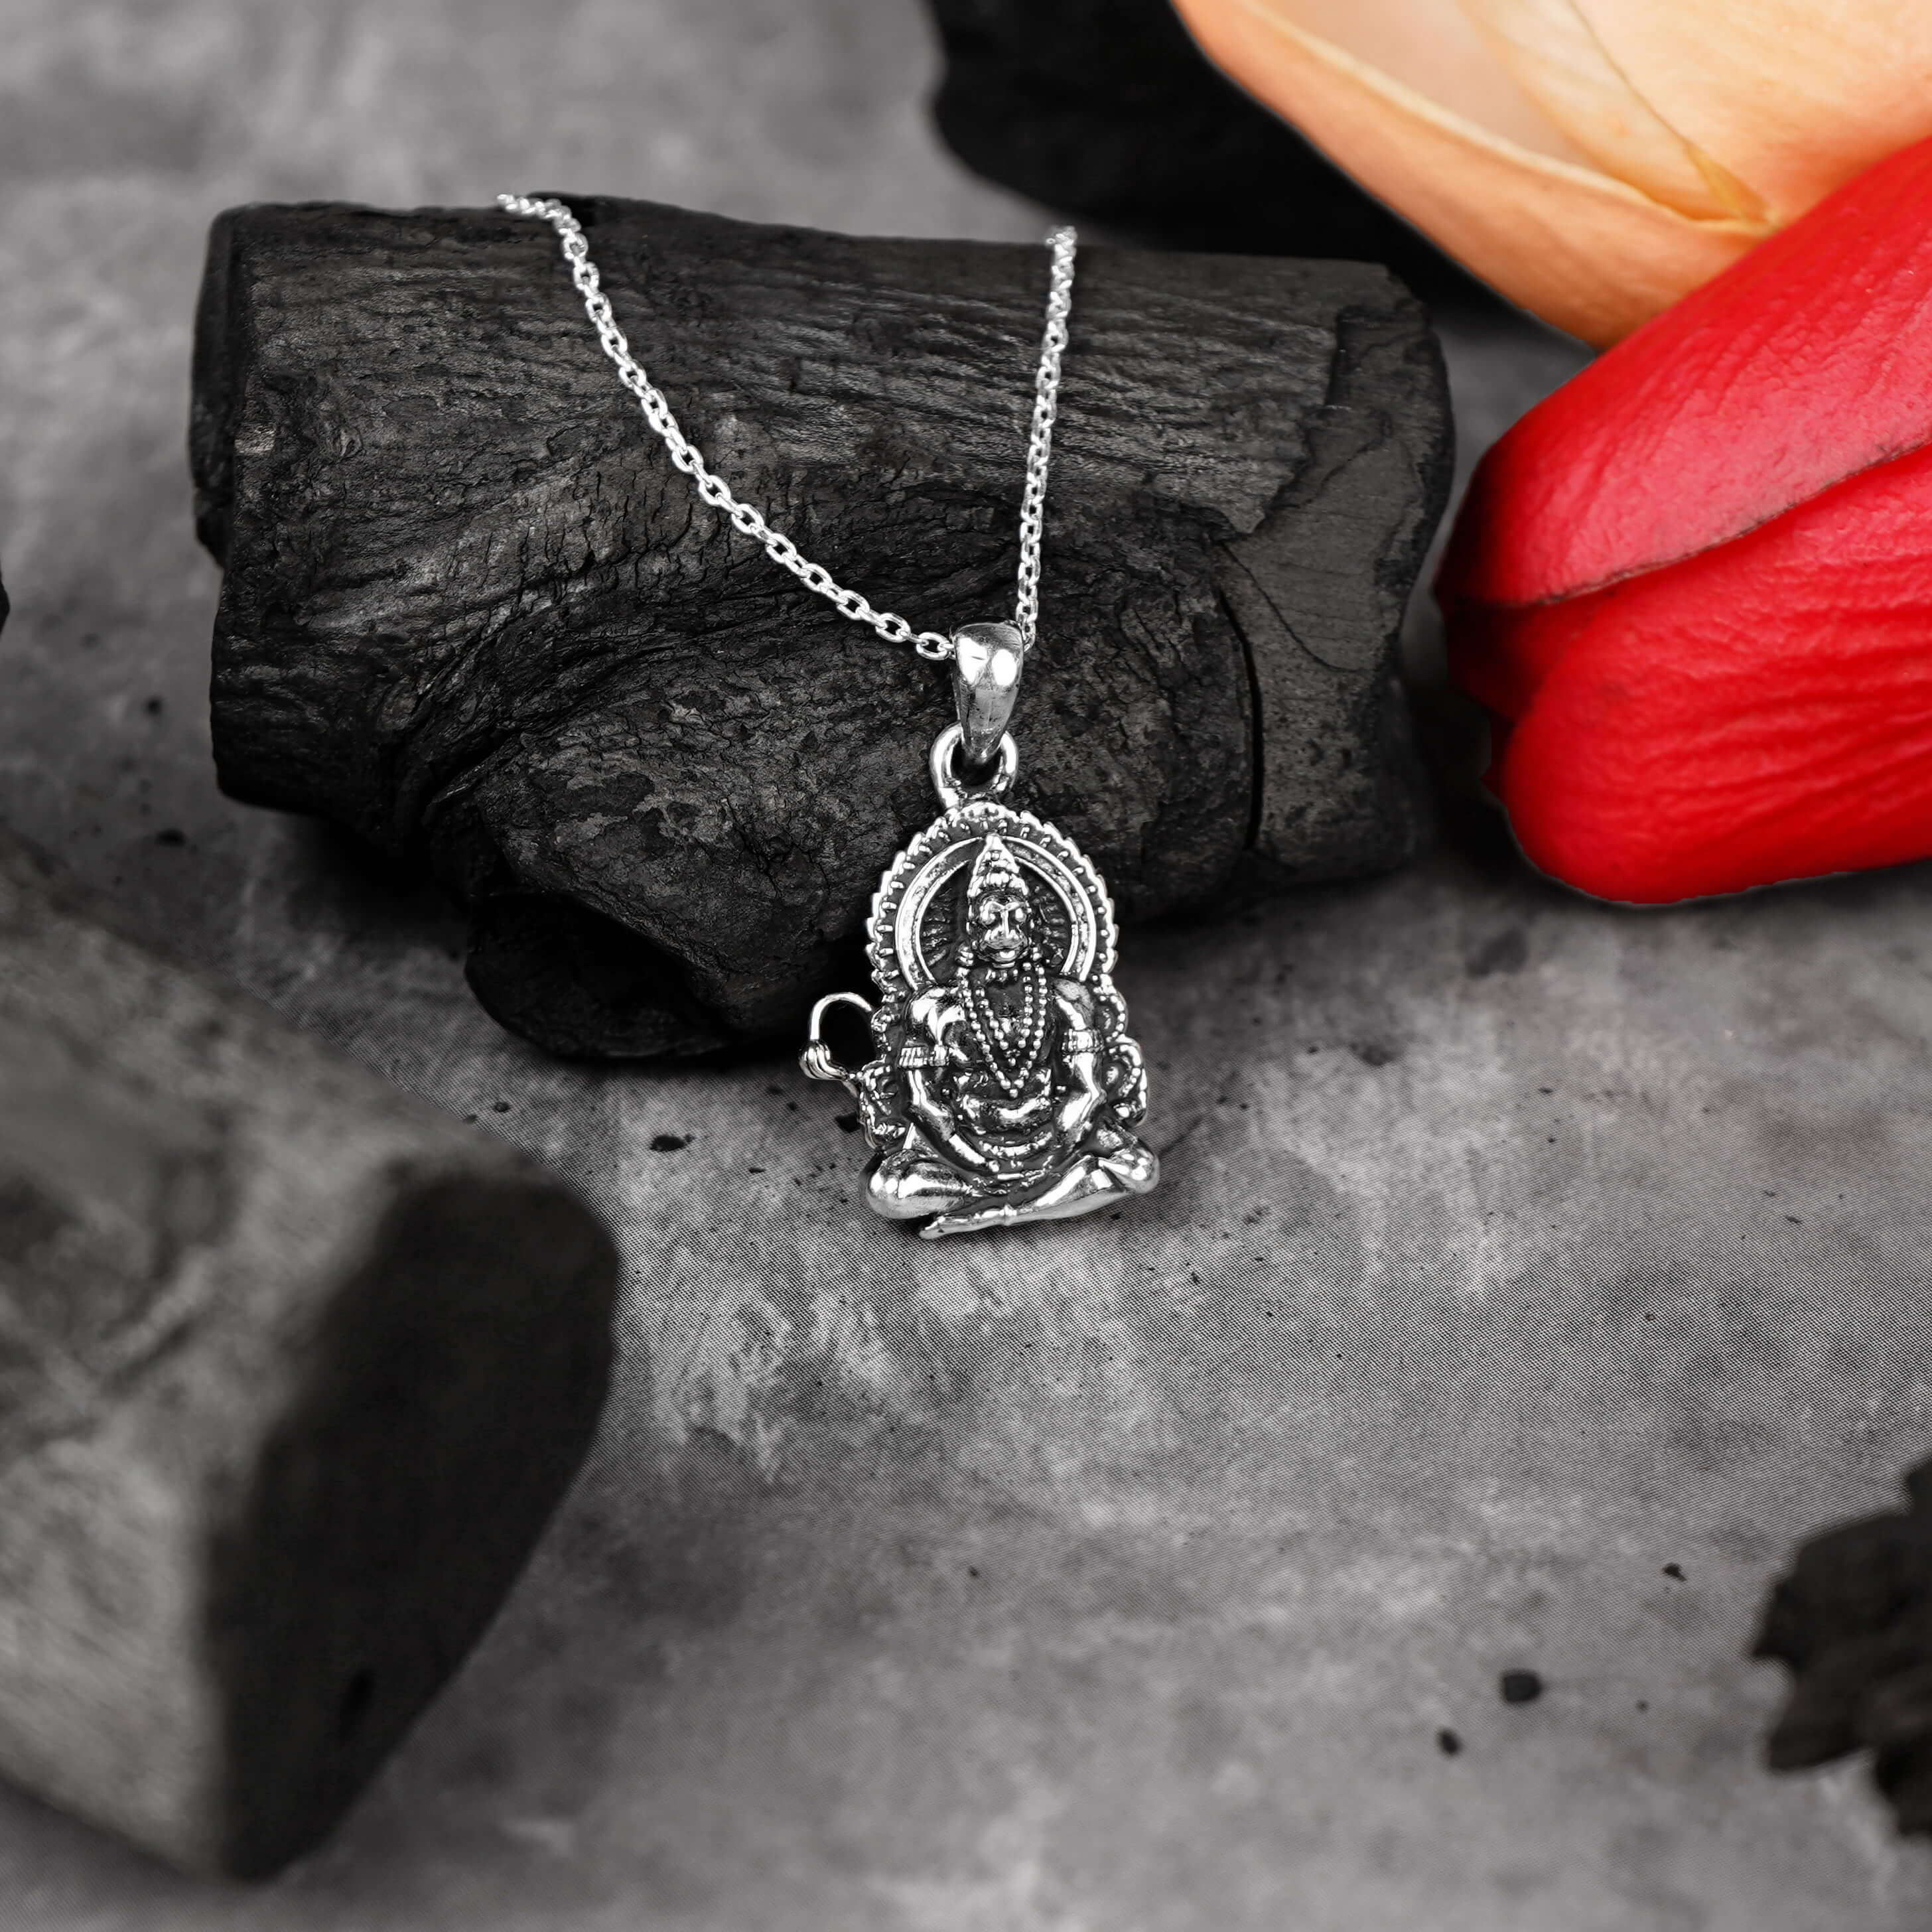 Pawanputra Hanuman Silver Pendant and Necklace for Men and Women